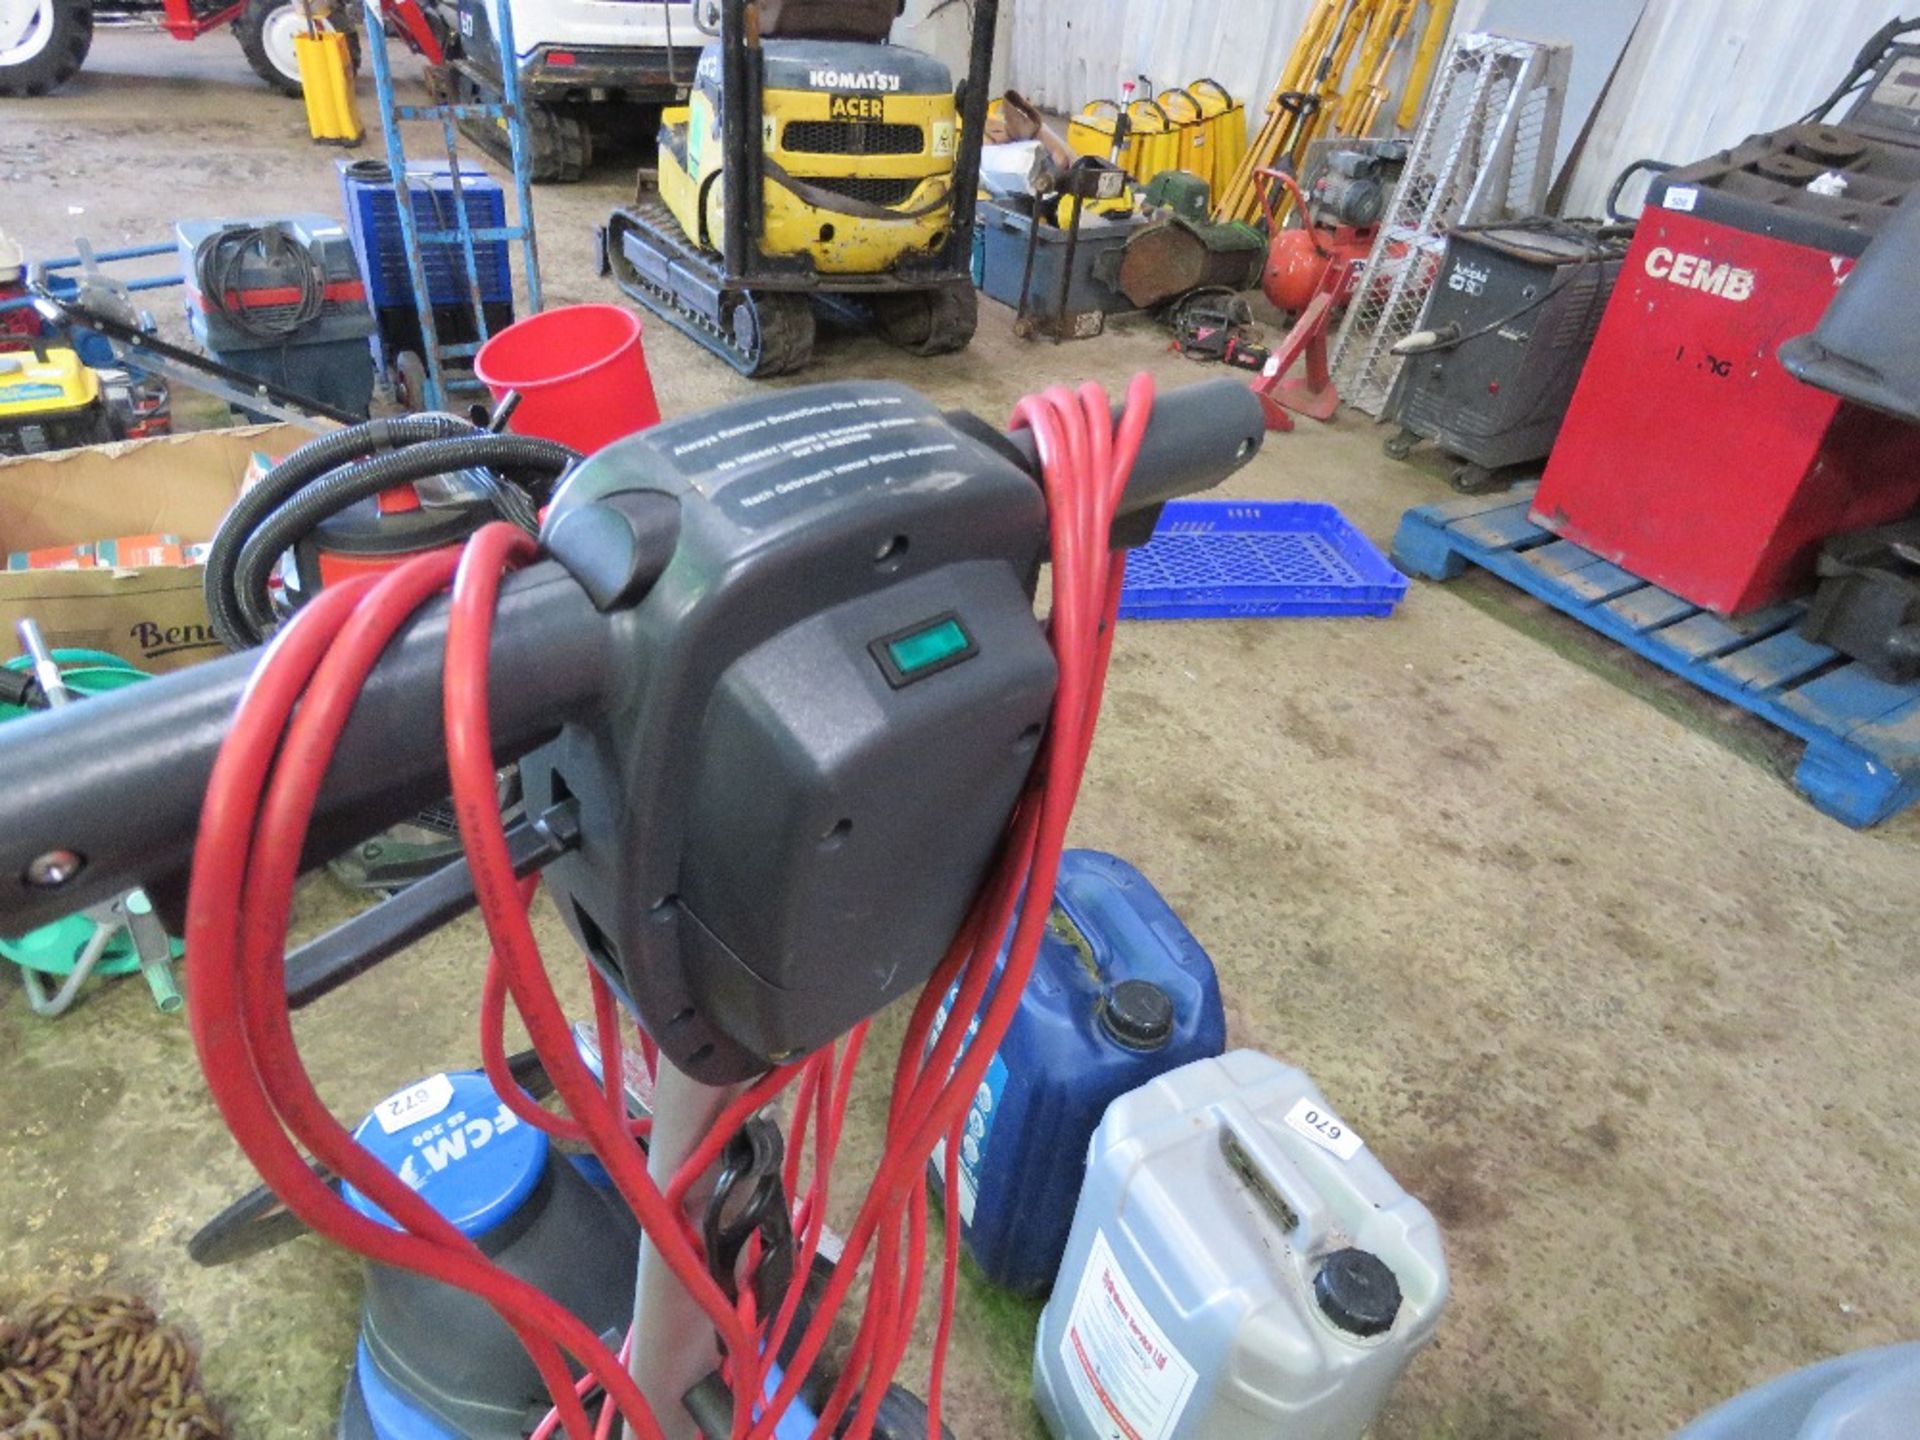 FCM200 FLOOR SCRUBBER UNIT WITH HEADS, 240VOLT POWERED. THIS LOT IS SOLD UNDER THE AUCTIONEERS MA - Image 6 of 6